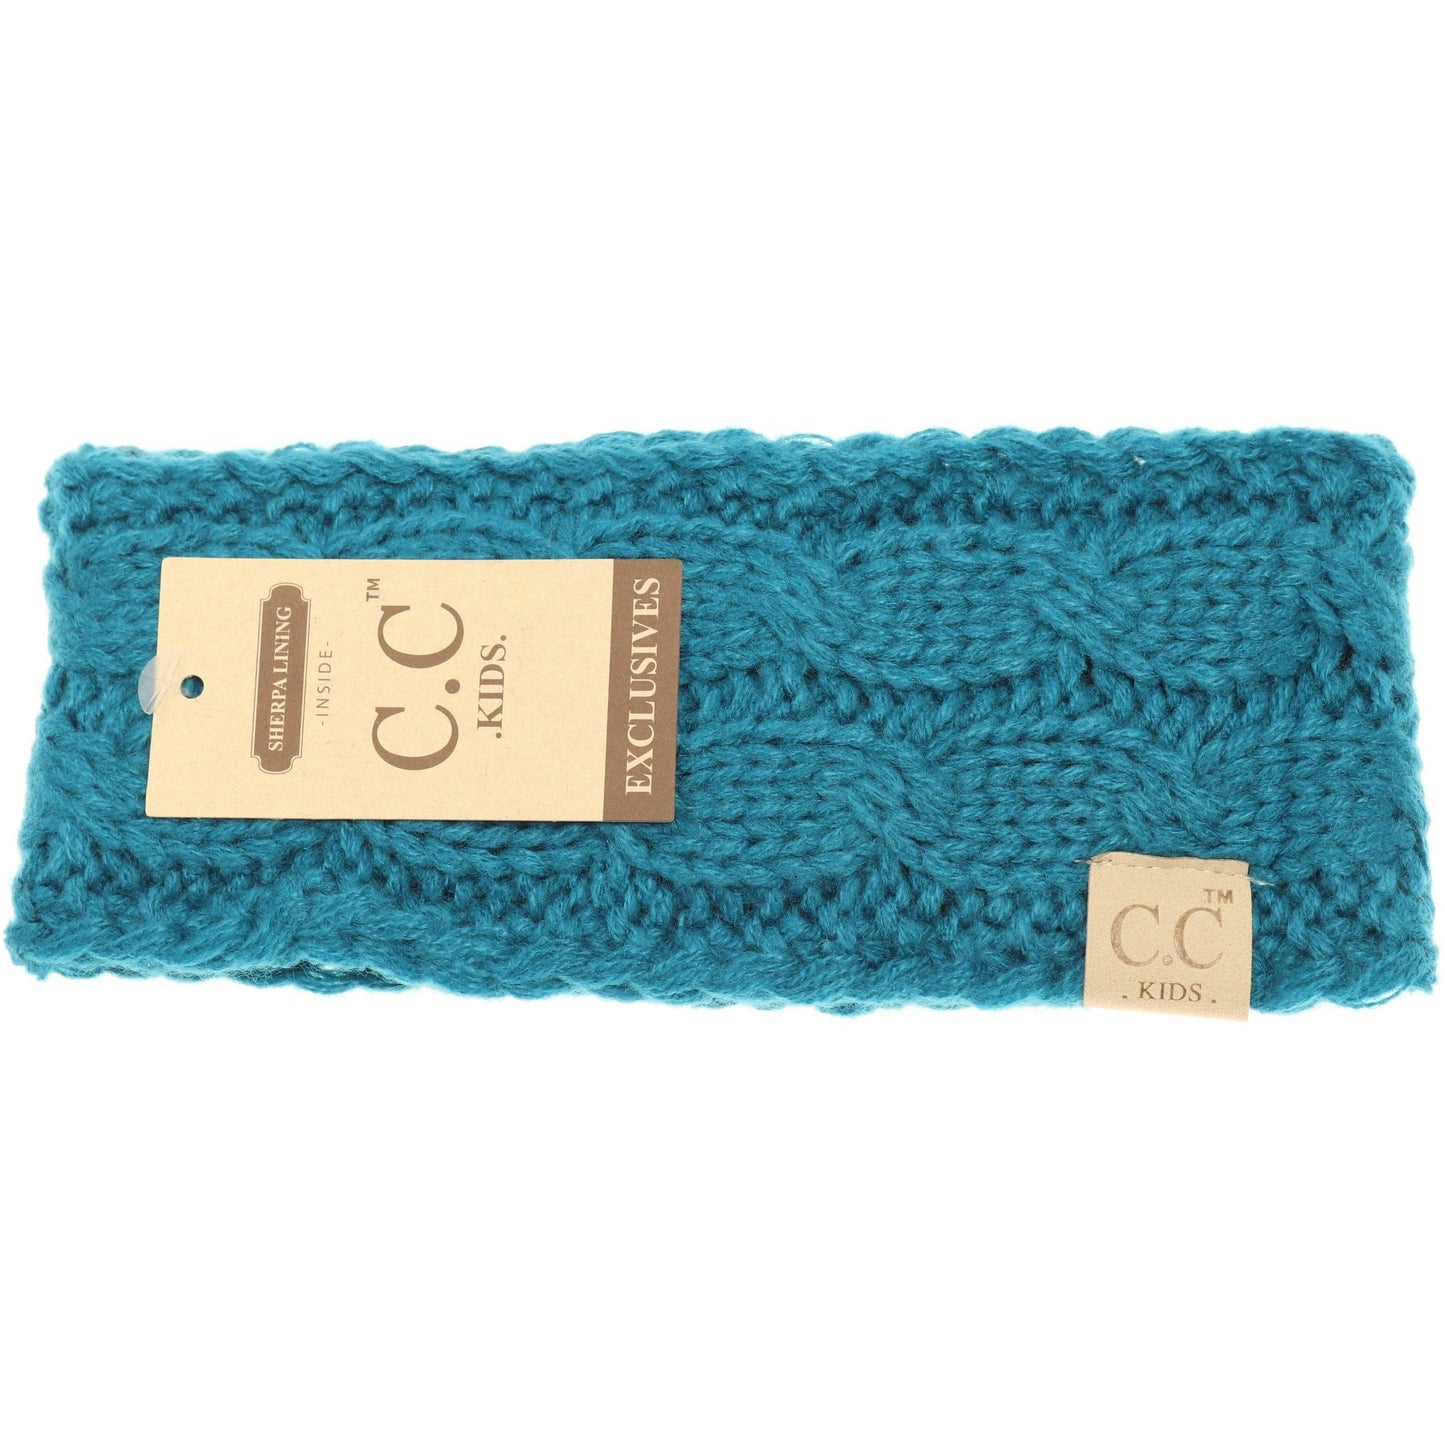 KIDS Solid Cable Knit CC Head Wrap: Teal